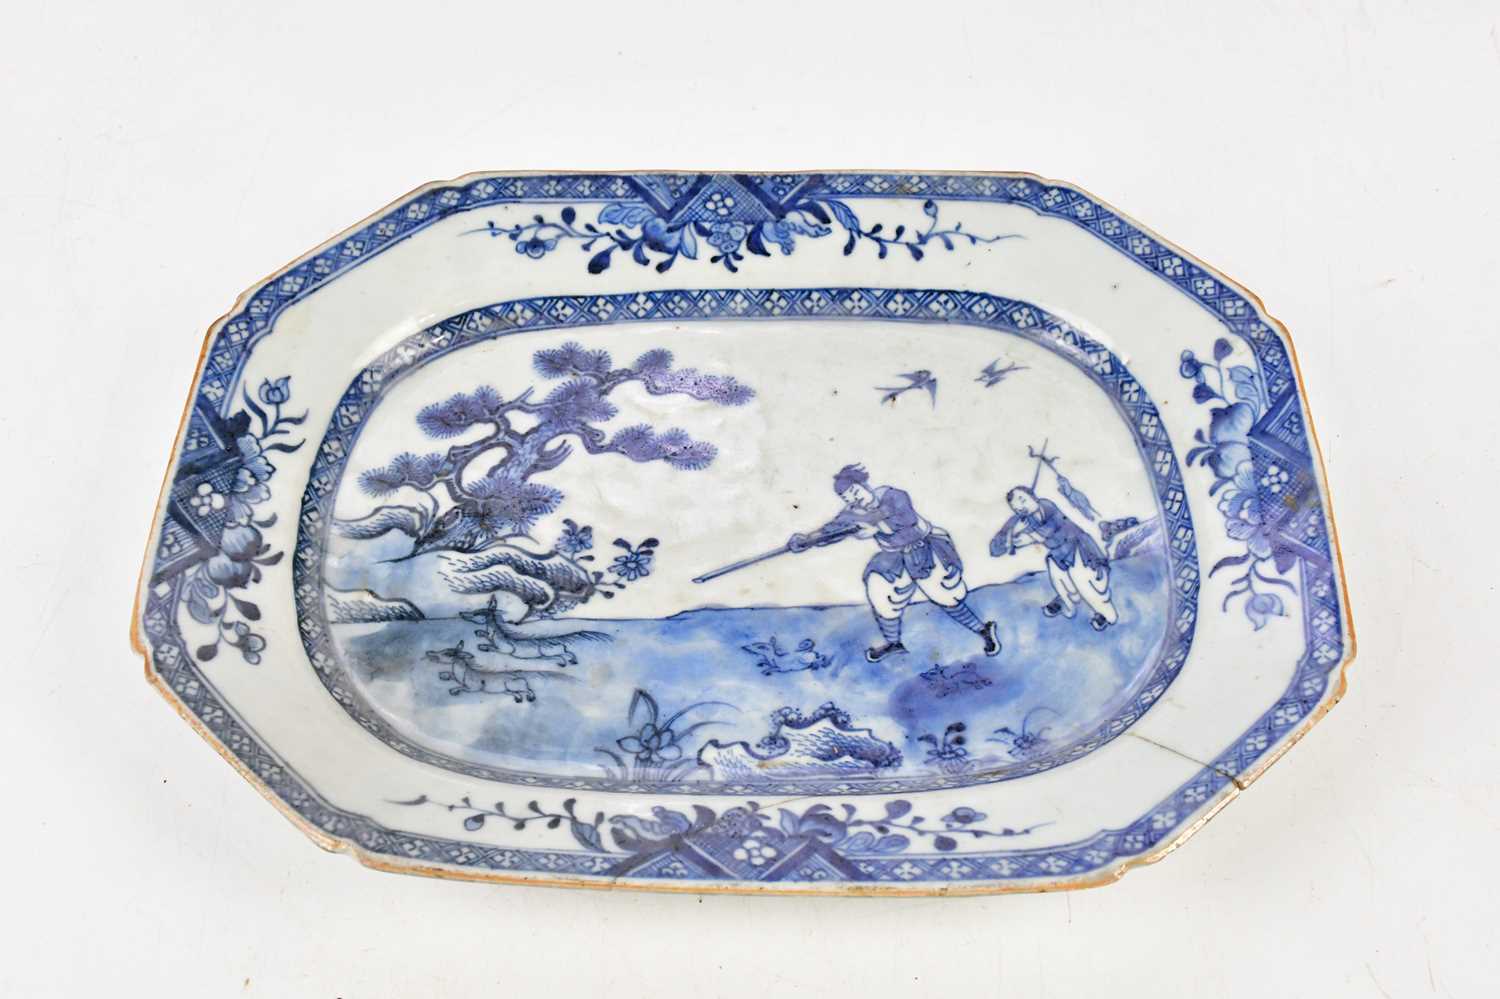 An 18th century Chinese blue and white Export ware plate, decorated with a hunting scene, 27x35.